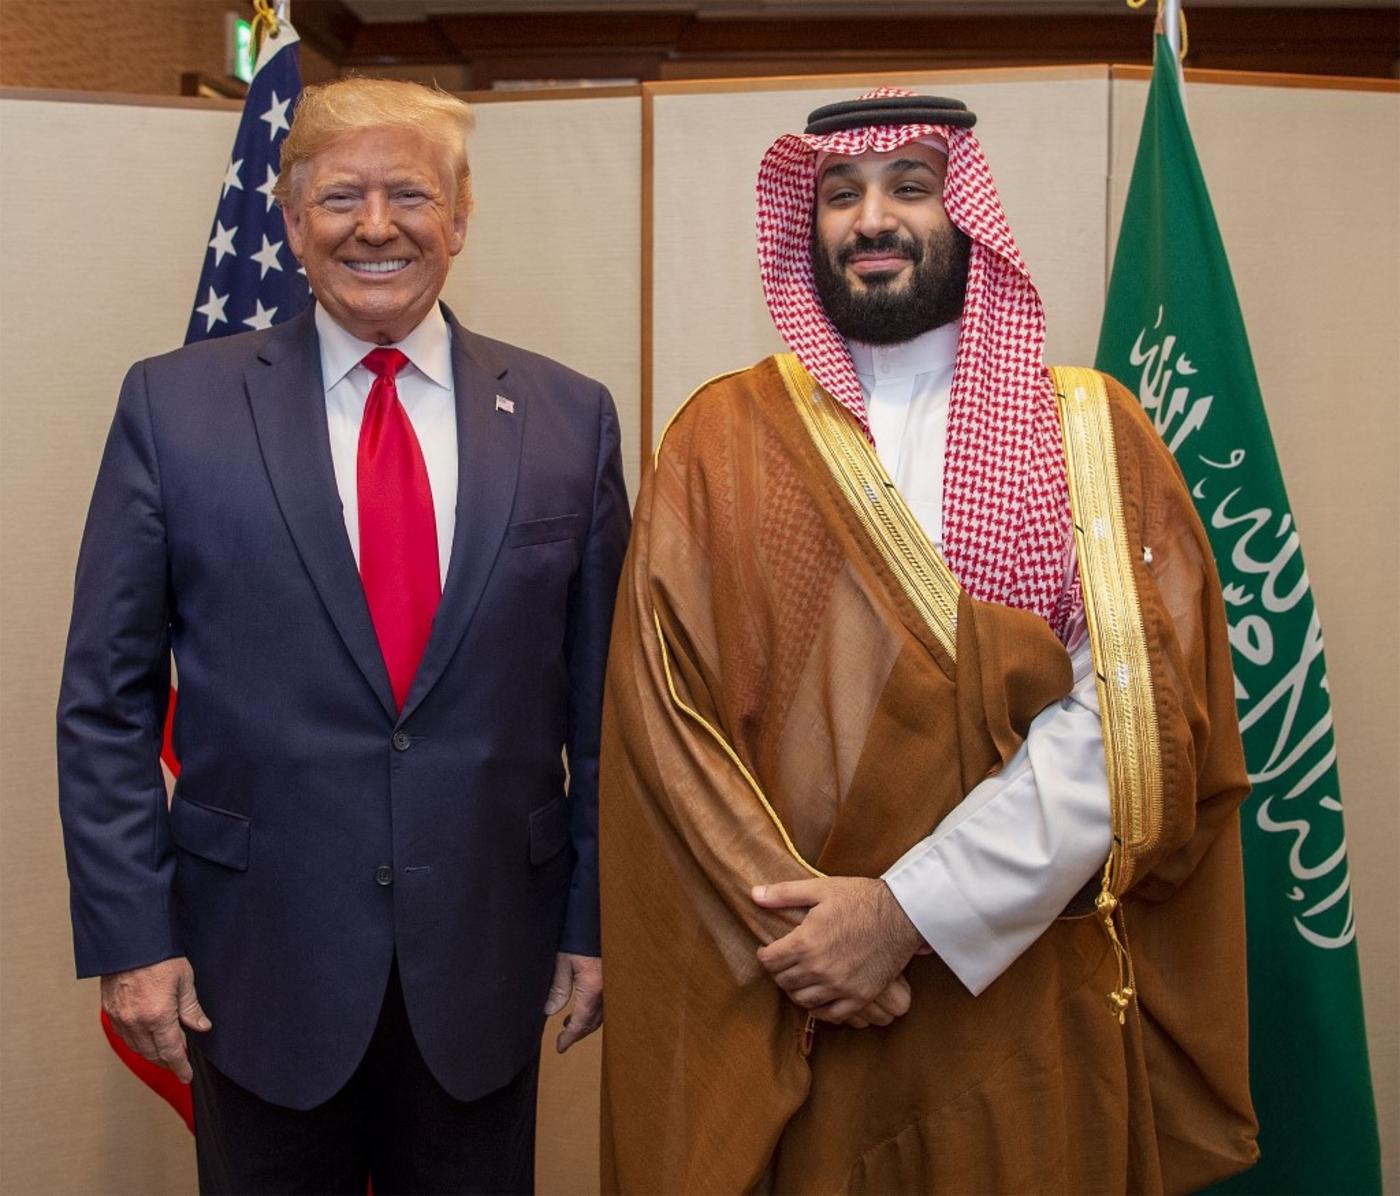 Saudi Crown Prince Mohammed bin Salman and US President Donald Trump during their meeting on the sidelines of the G20 summit in Osaka, Japan (AFP)